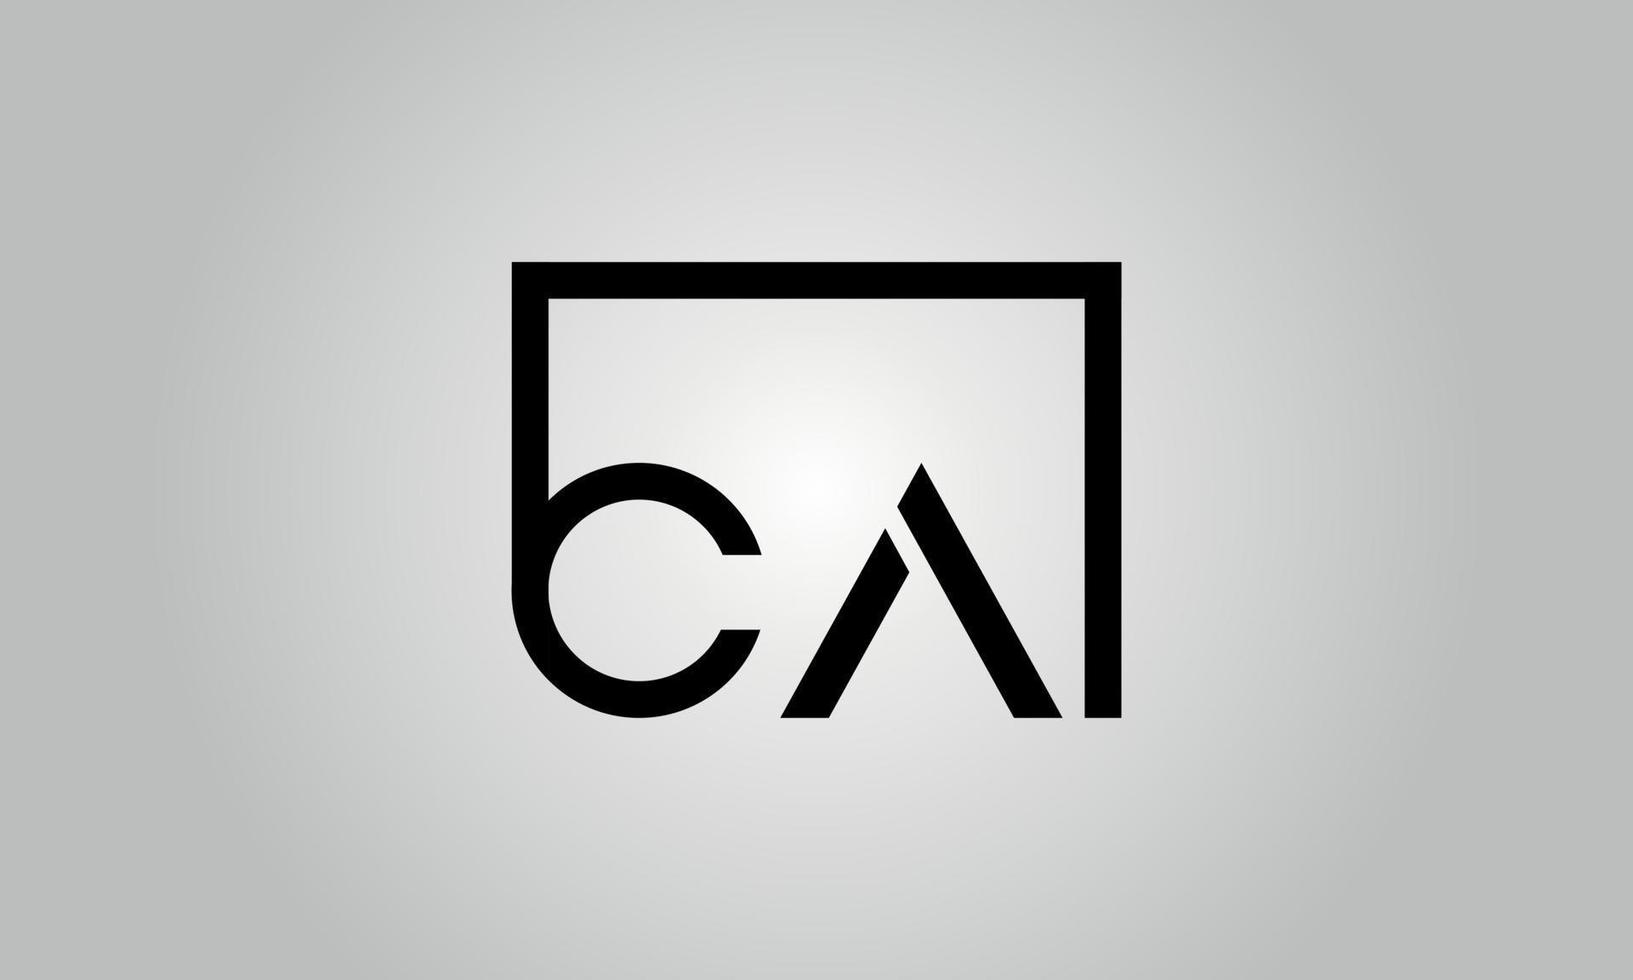 Letter CA logo design. CA logo with square shape in black colors vector free vector template.